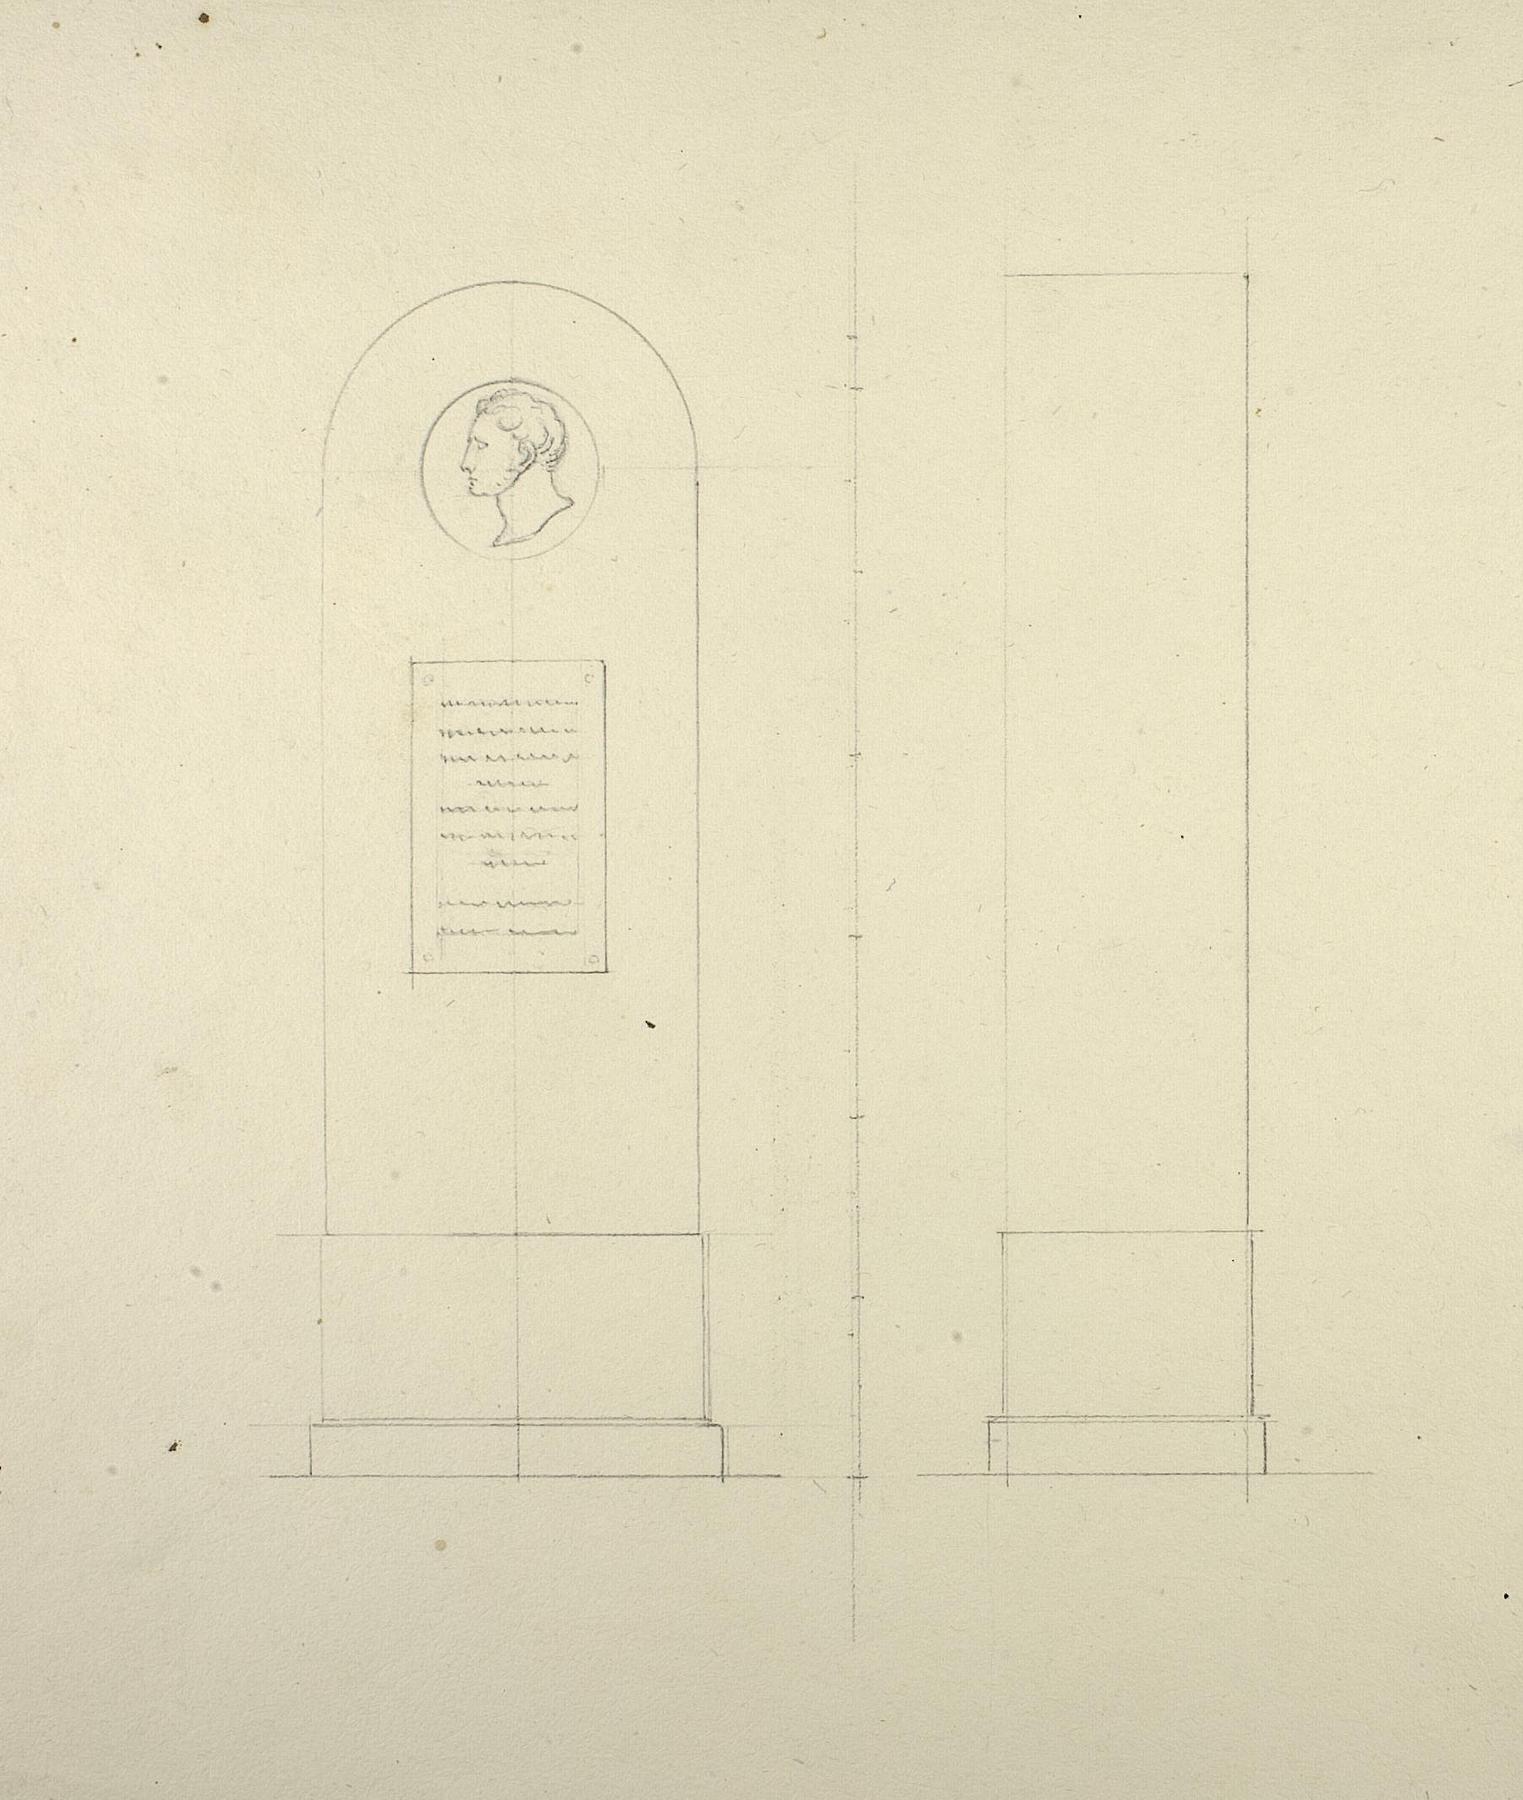 Tombstone to August von Goethe, elevations, D1576